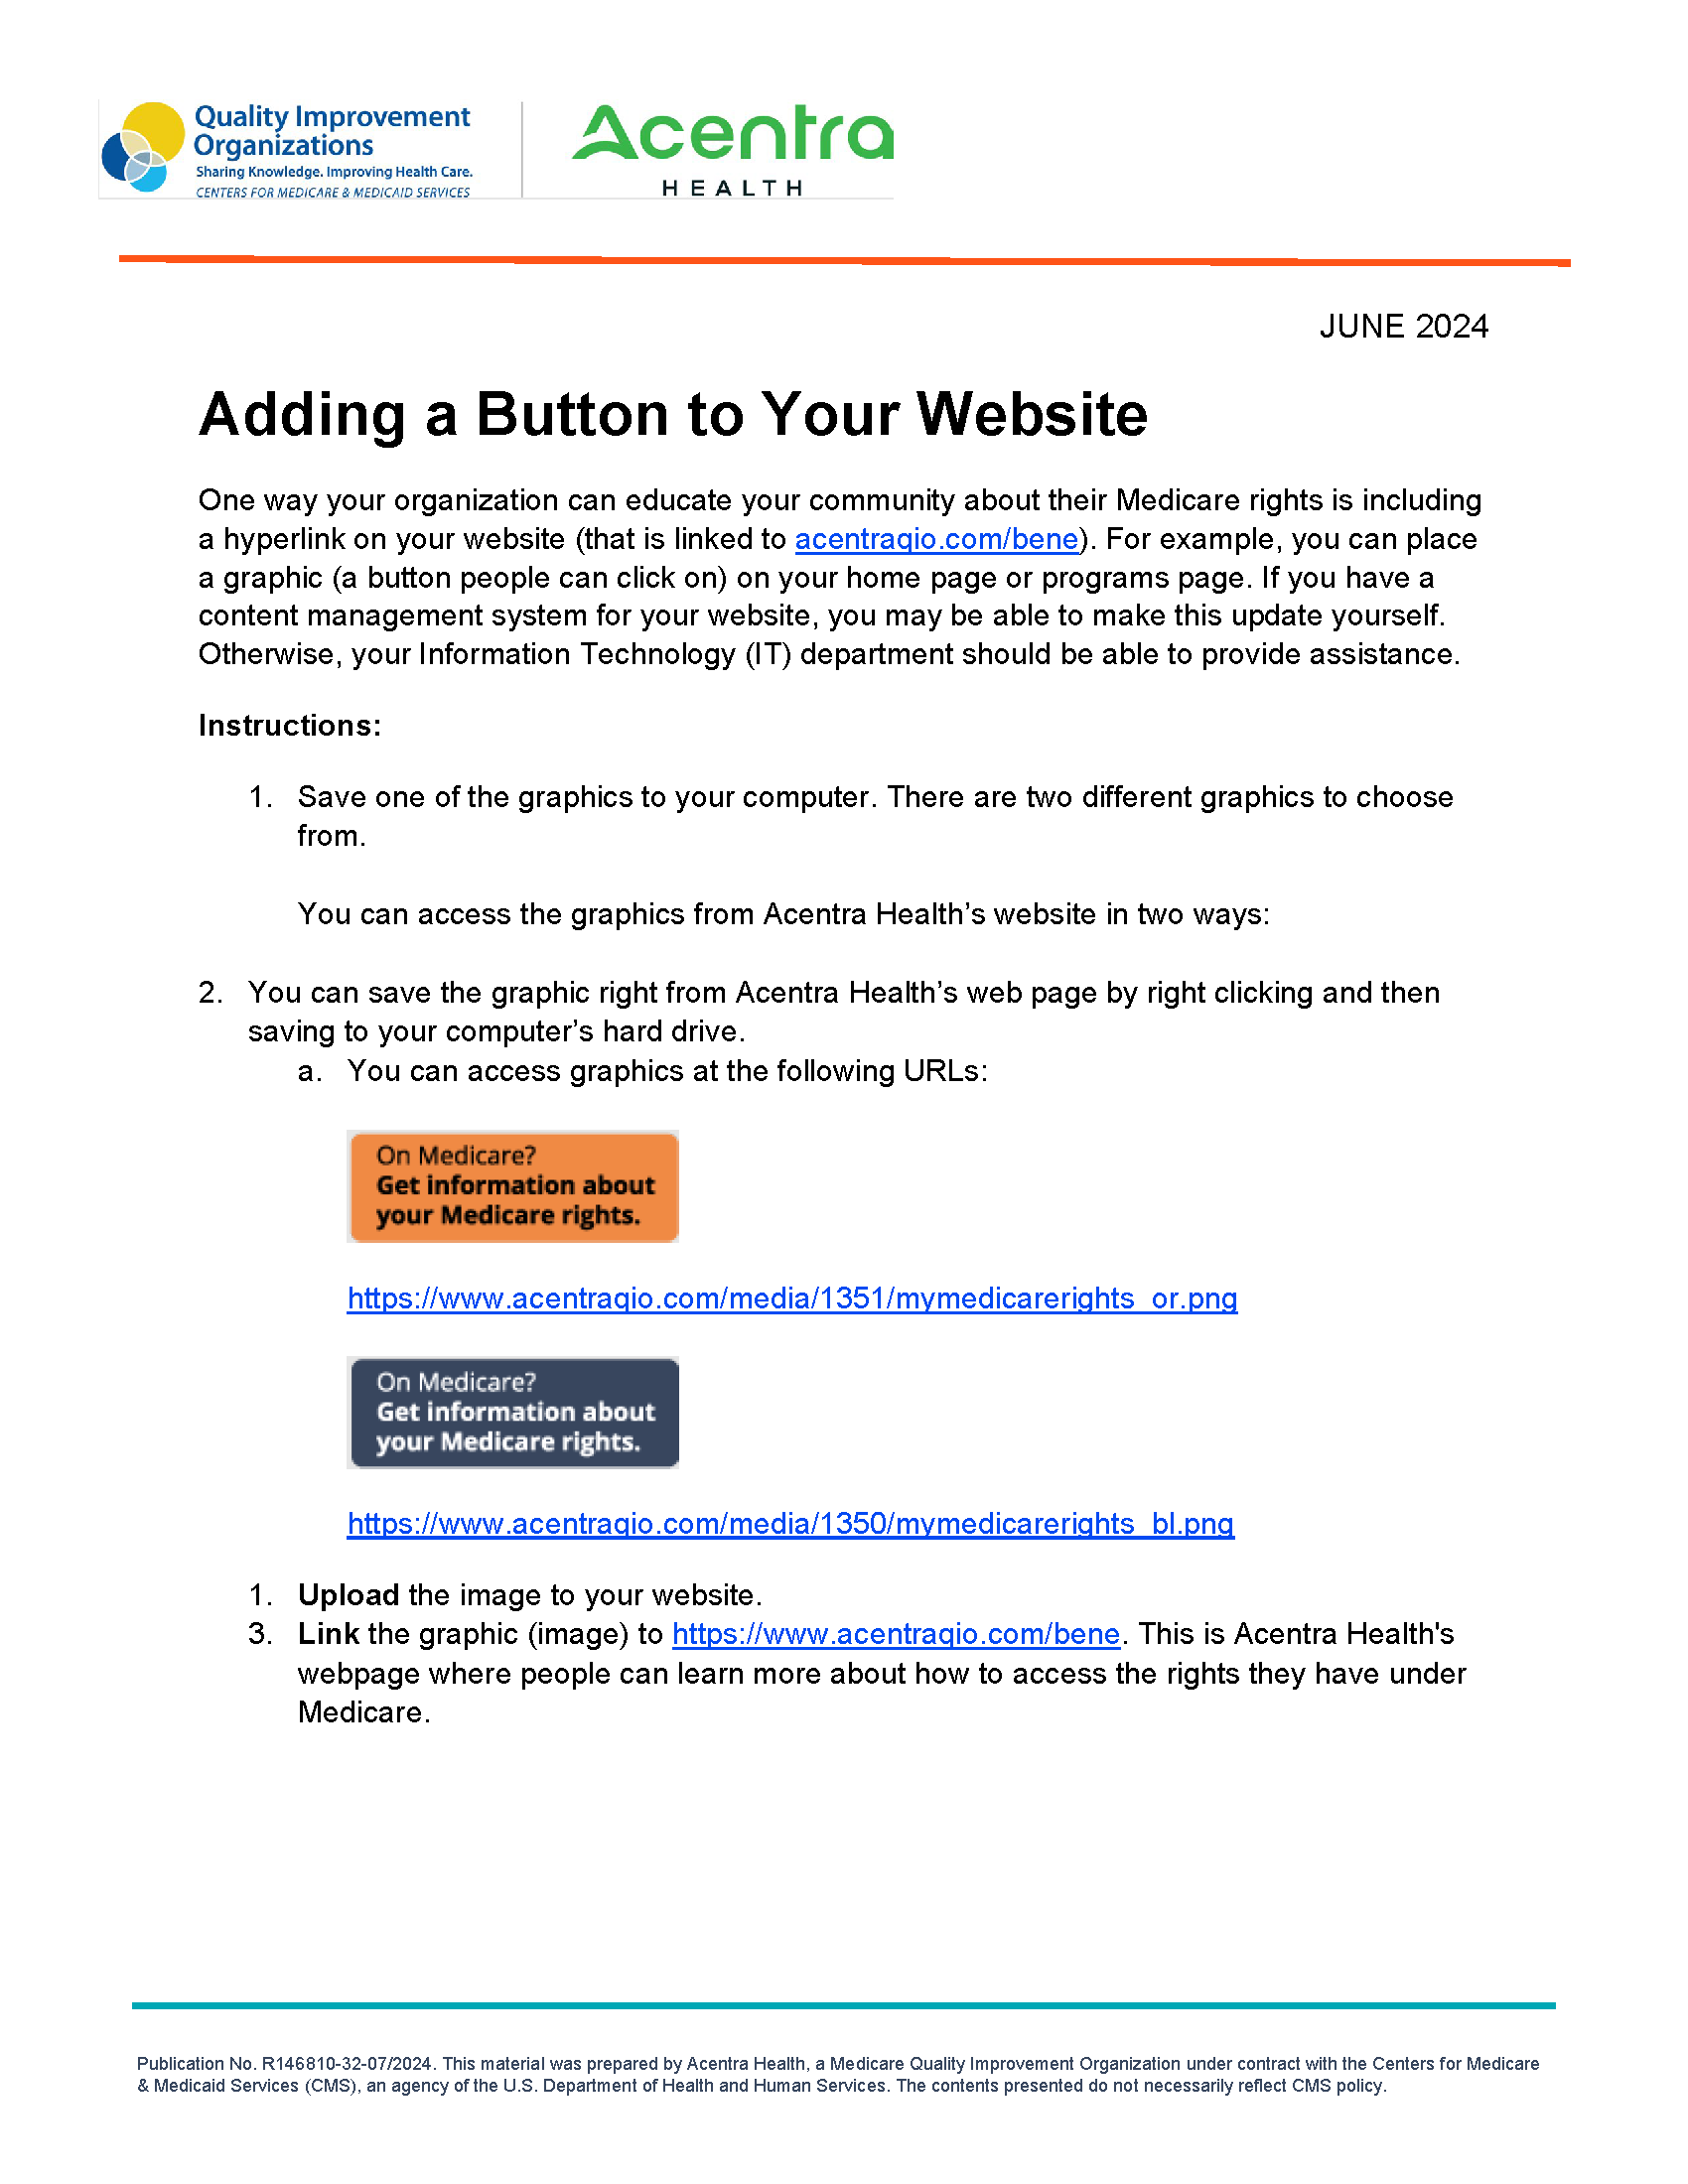 Adding a Button to Your Website